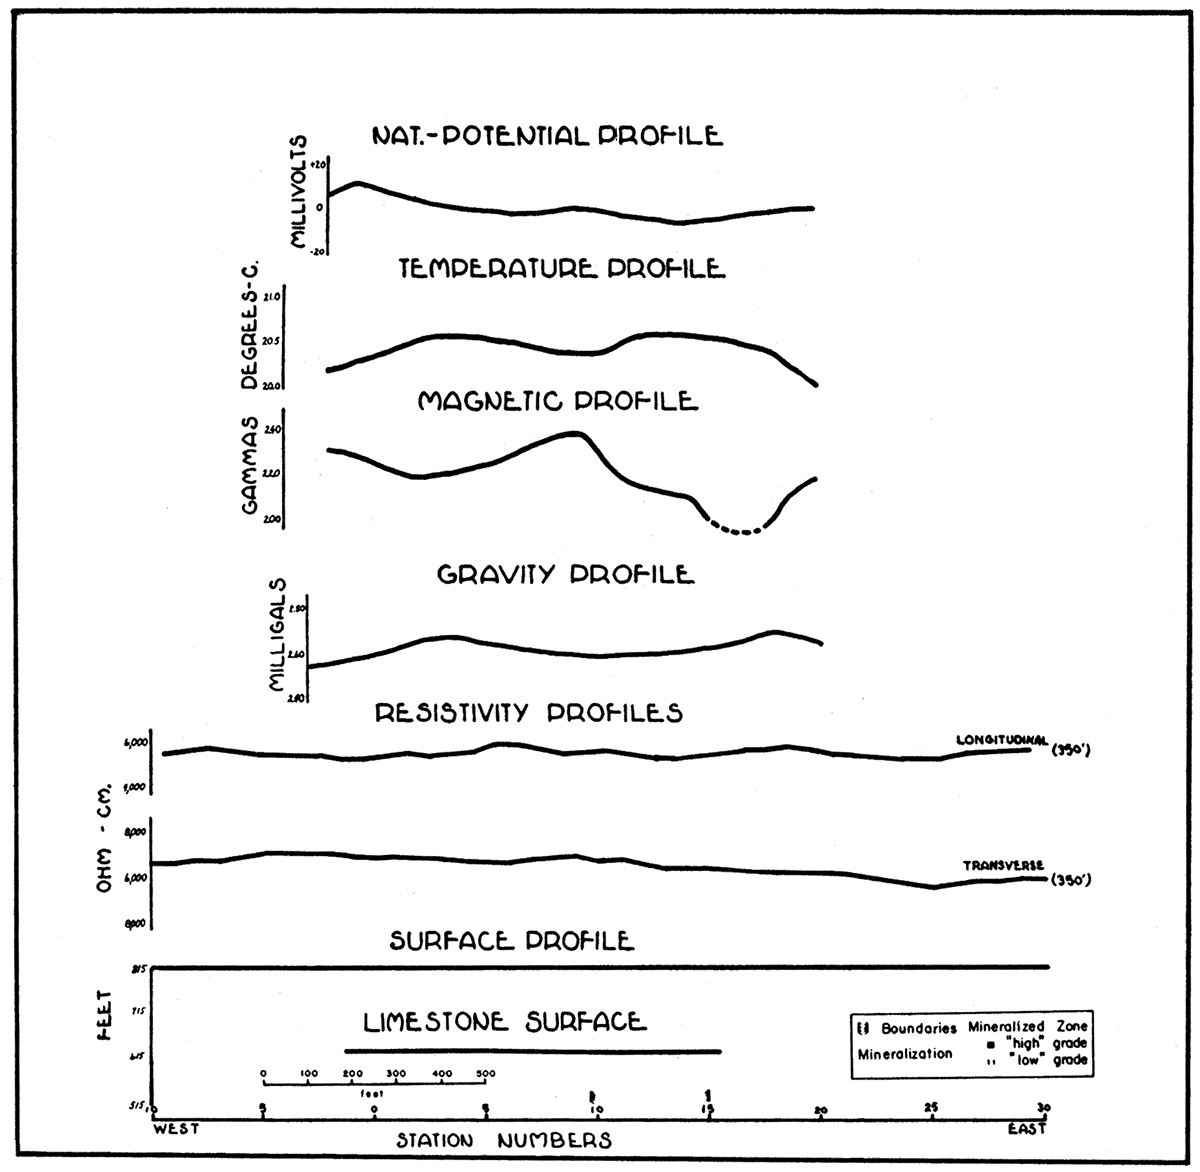 Profiles along traverse VIII-VIII' in the Walton area, showing magnetic, gravity, natural potential, resistivity (longitudinal and transverse), and geothermal anomalies, zone of mineralization, and configuration of the top of the limestone.